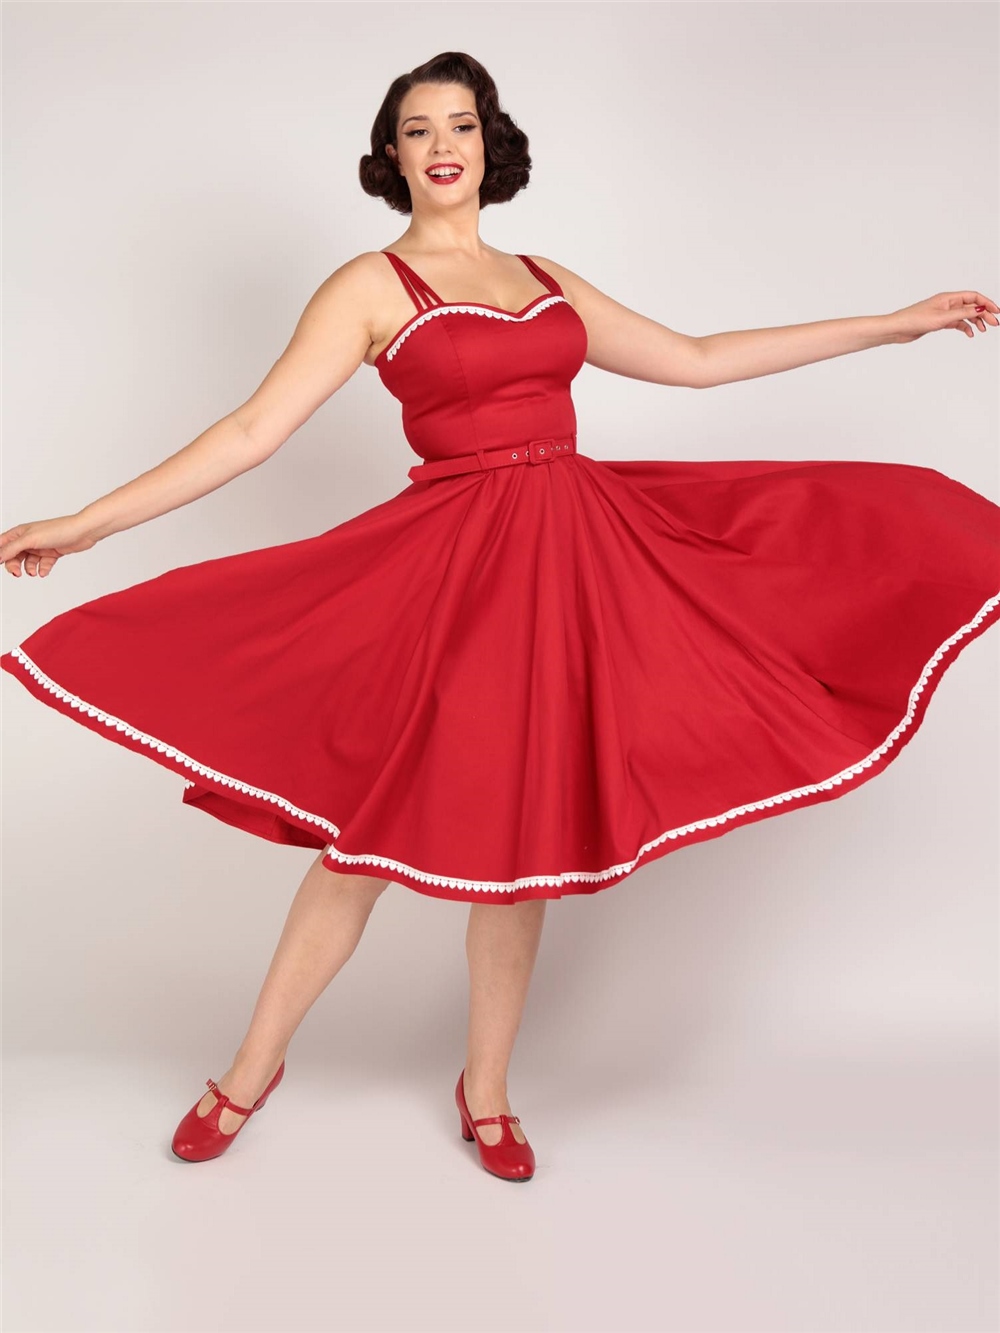 CCDR017RED_robe-rockabilly-retro-pin-up-50-s-collectif-nova-heart-red